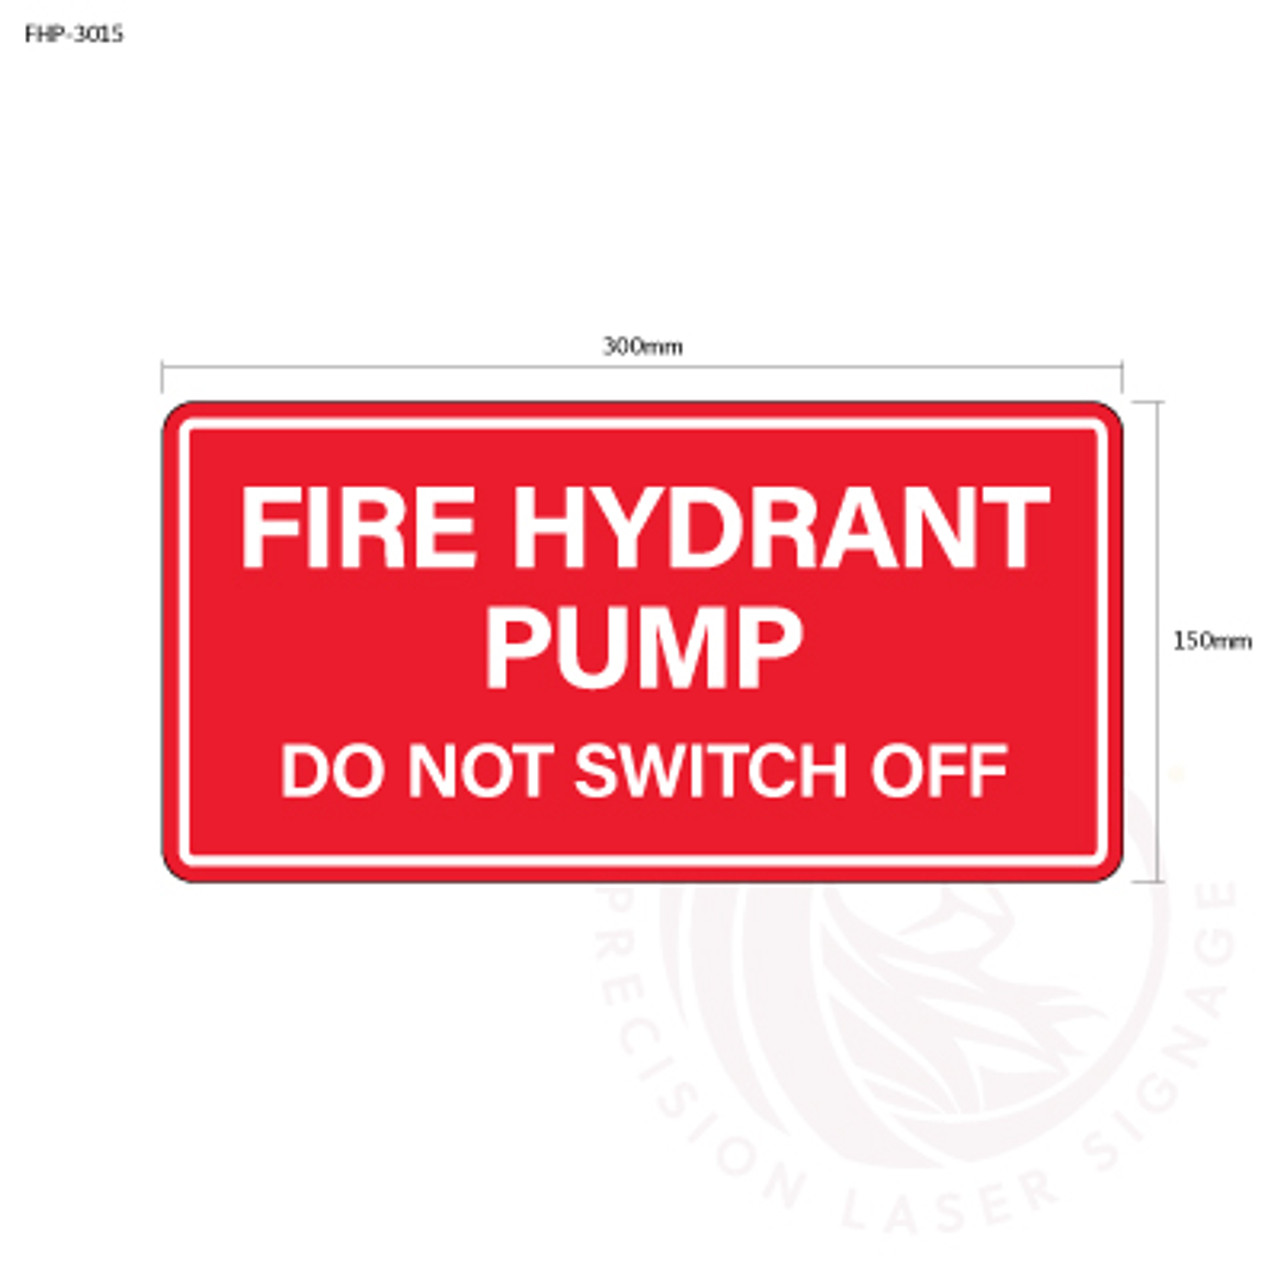 Fire Hydrant Pump | Do Not Switch Off - Standard fire statutory sign, compliant with the Building Code of Australia requirements.